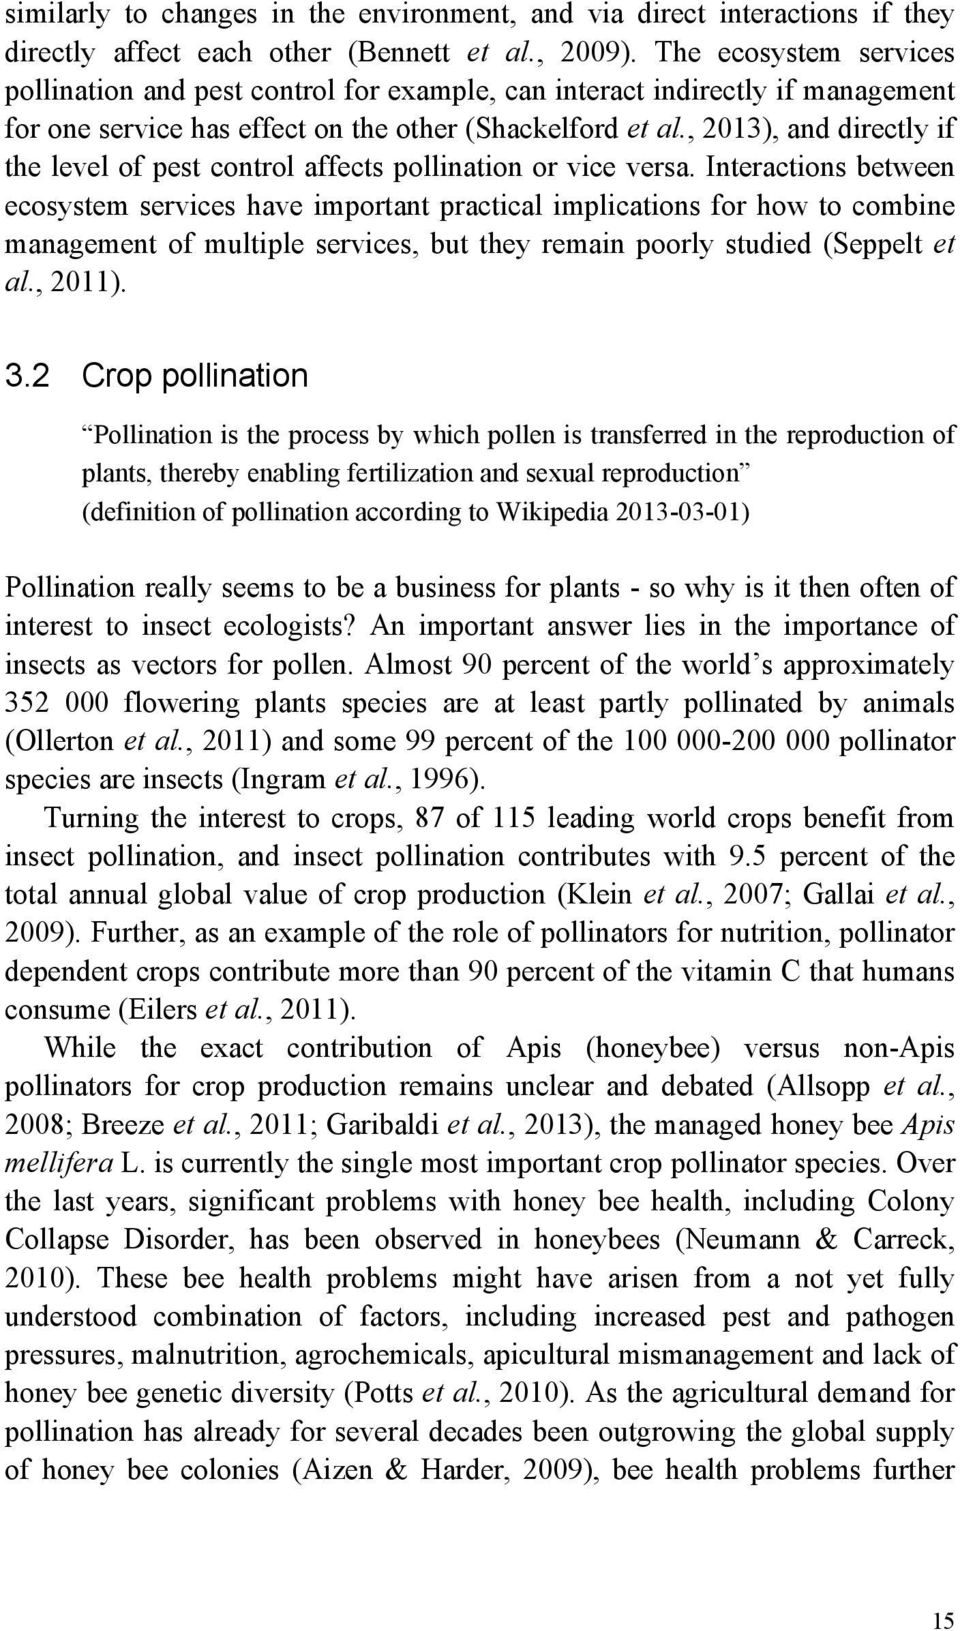 , 2013), and directly if the level of pest control affects pollination or vice versa.